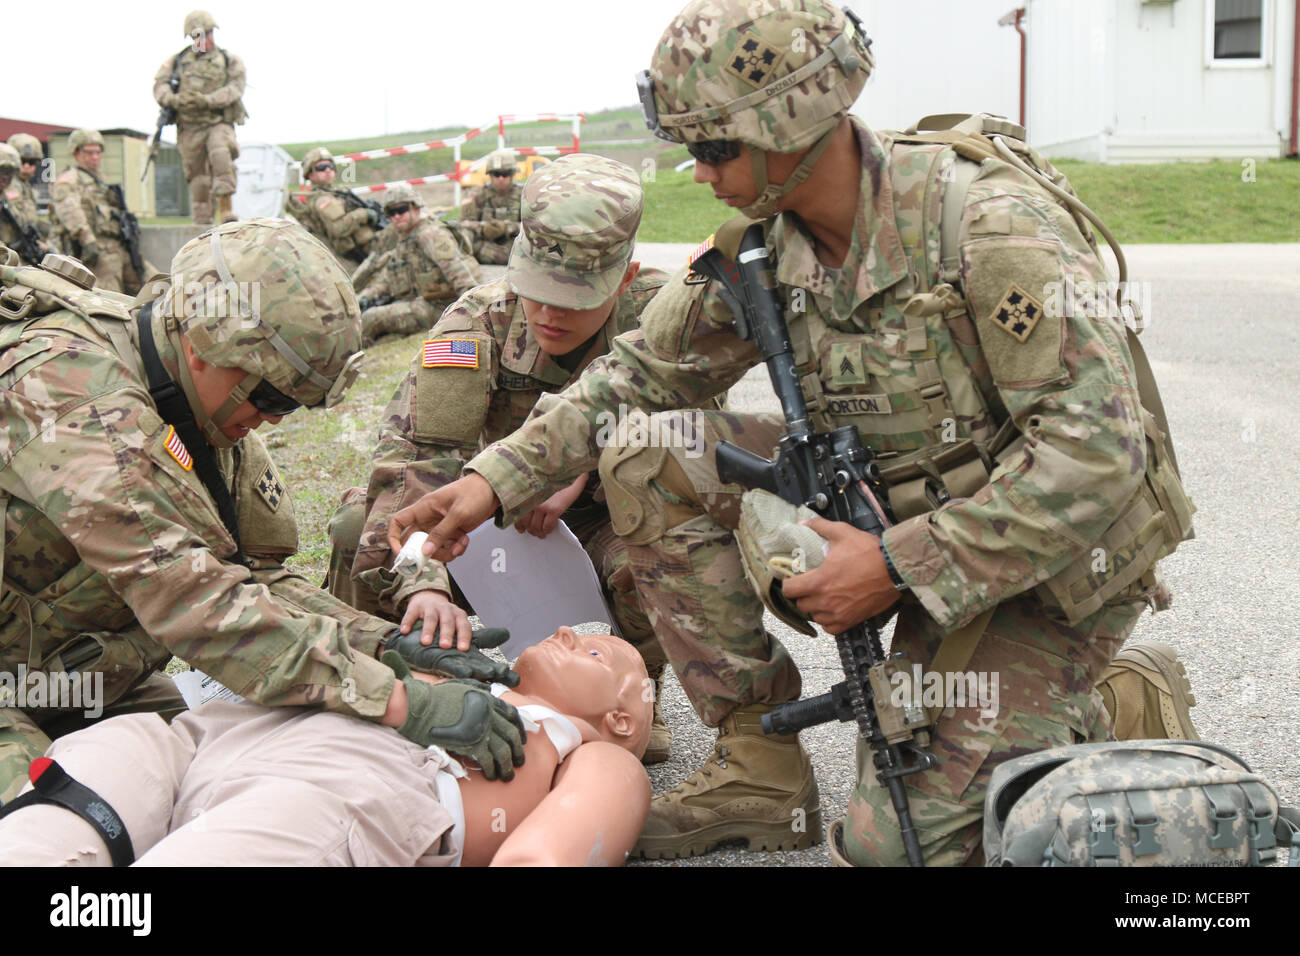 Cpl. Sarah Shelton (center) instructs Pfc. Jose Gonzales III (left) and Sgt. Deion Horton, Soldiers with the 3-61 Cavalry Regiment, 2nd Infantry Brigade Combat Team, 4th Infantry Division, to control bleeding, while bandaging a chest wound at a combat lifesaver (CLS) trauma simulation lane during a 40-hour CLS refresher course run by the Camp Marechal De Lattre De Tassigny clinic on April 11, 2018. (U.S. Army photo by Sgt. Casey Hustin, 19th Public Affairs Detachment) Stock Photo